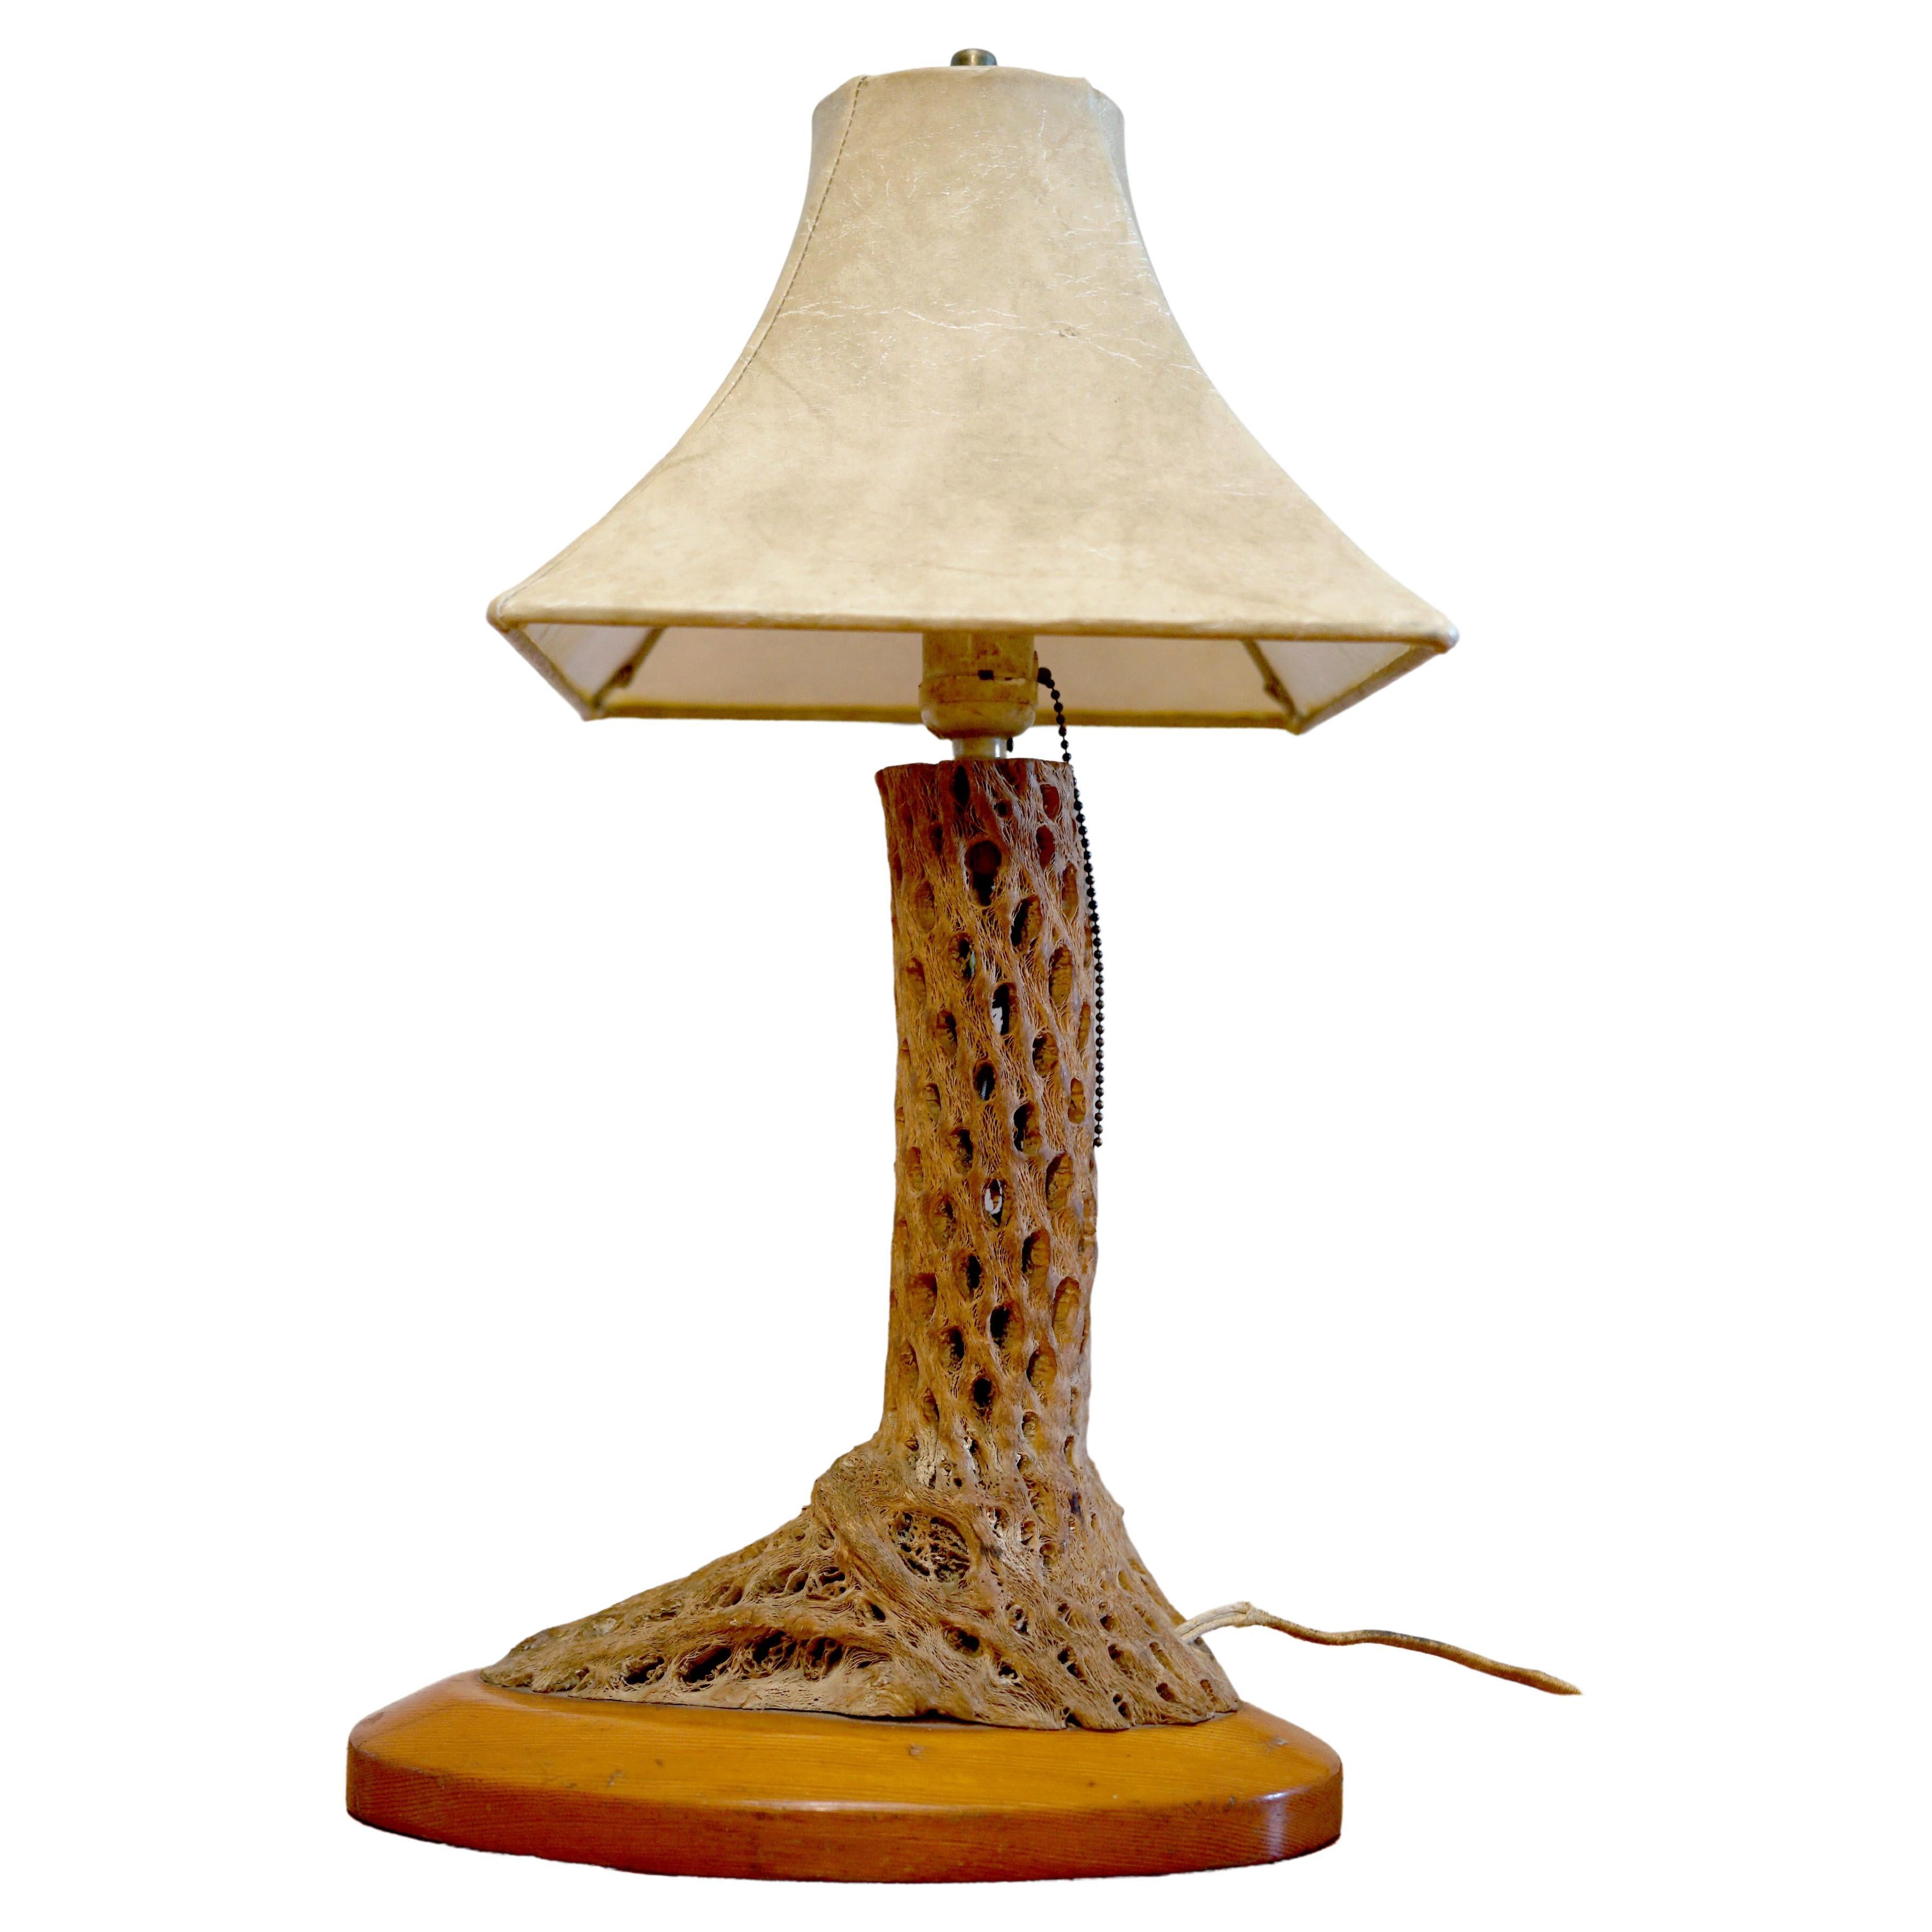 Vintage cholla wood Table Lamp on Maple Base with Original Shade